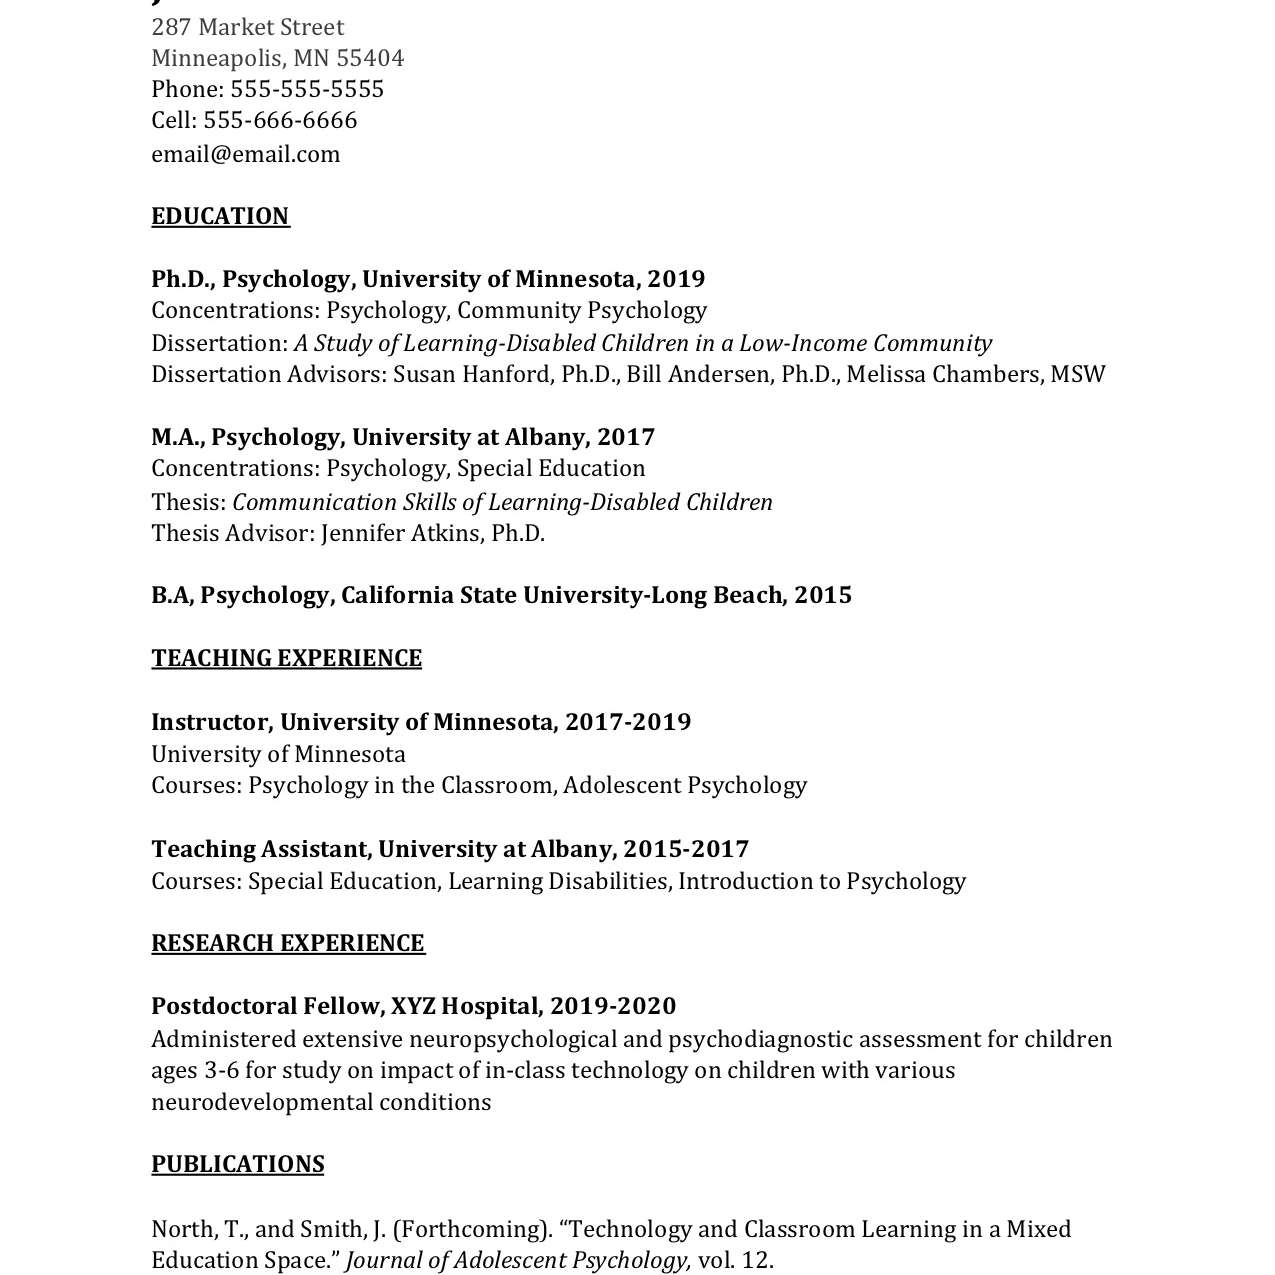 how to write a curriculum vitae for education